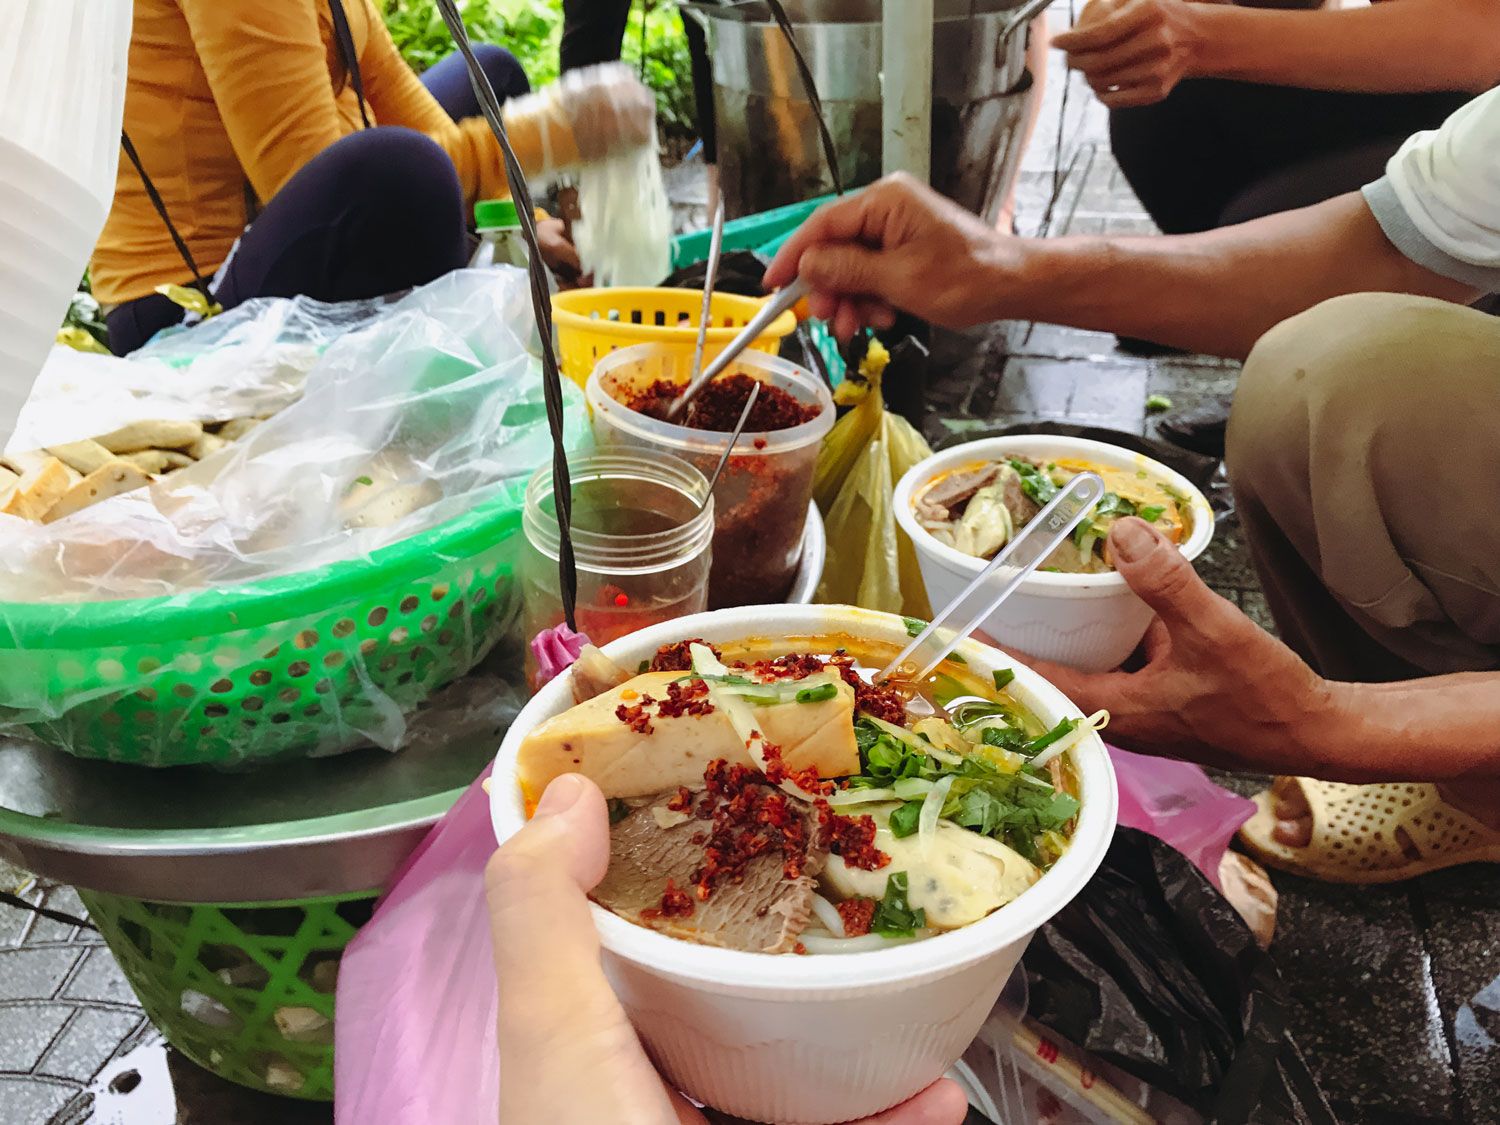 A busy food stall in Ho Chi Minh City.